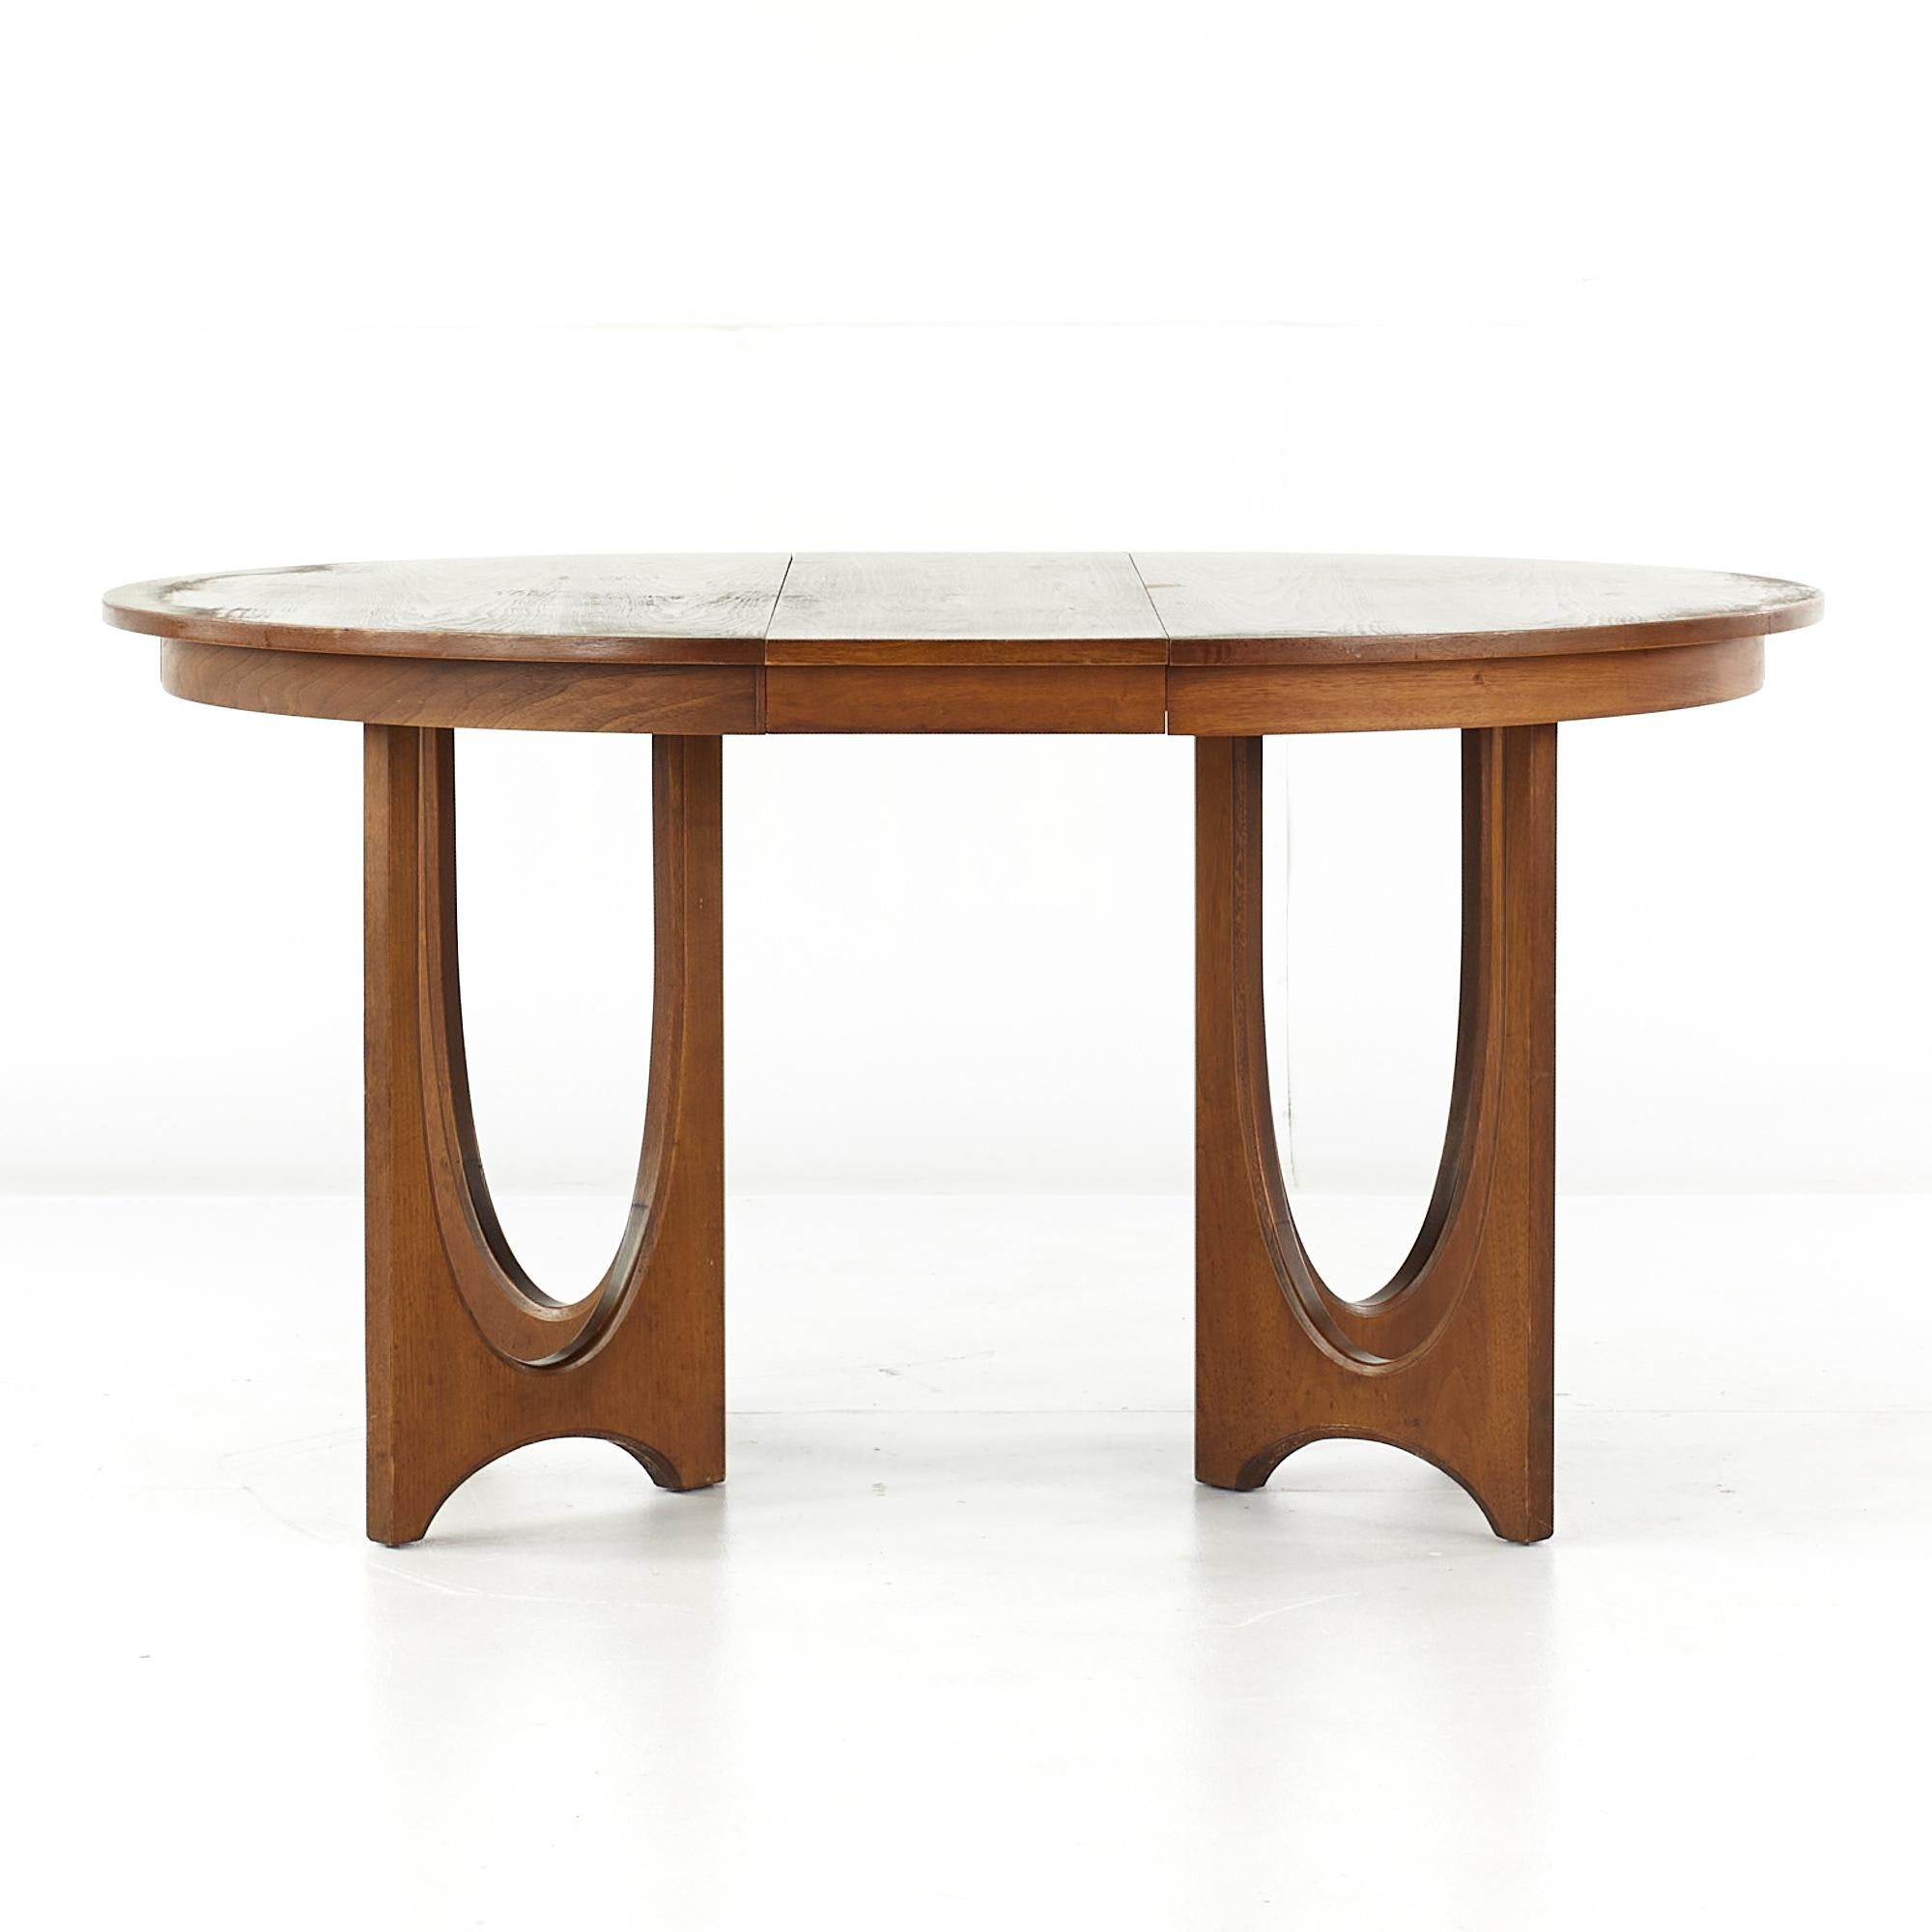 Late 20th Century Broyhill Brasilia Mid-Century Pedestal Dining Table with 1 Leaf